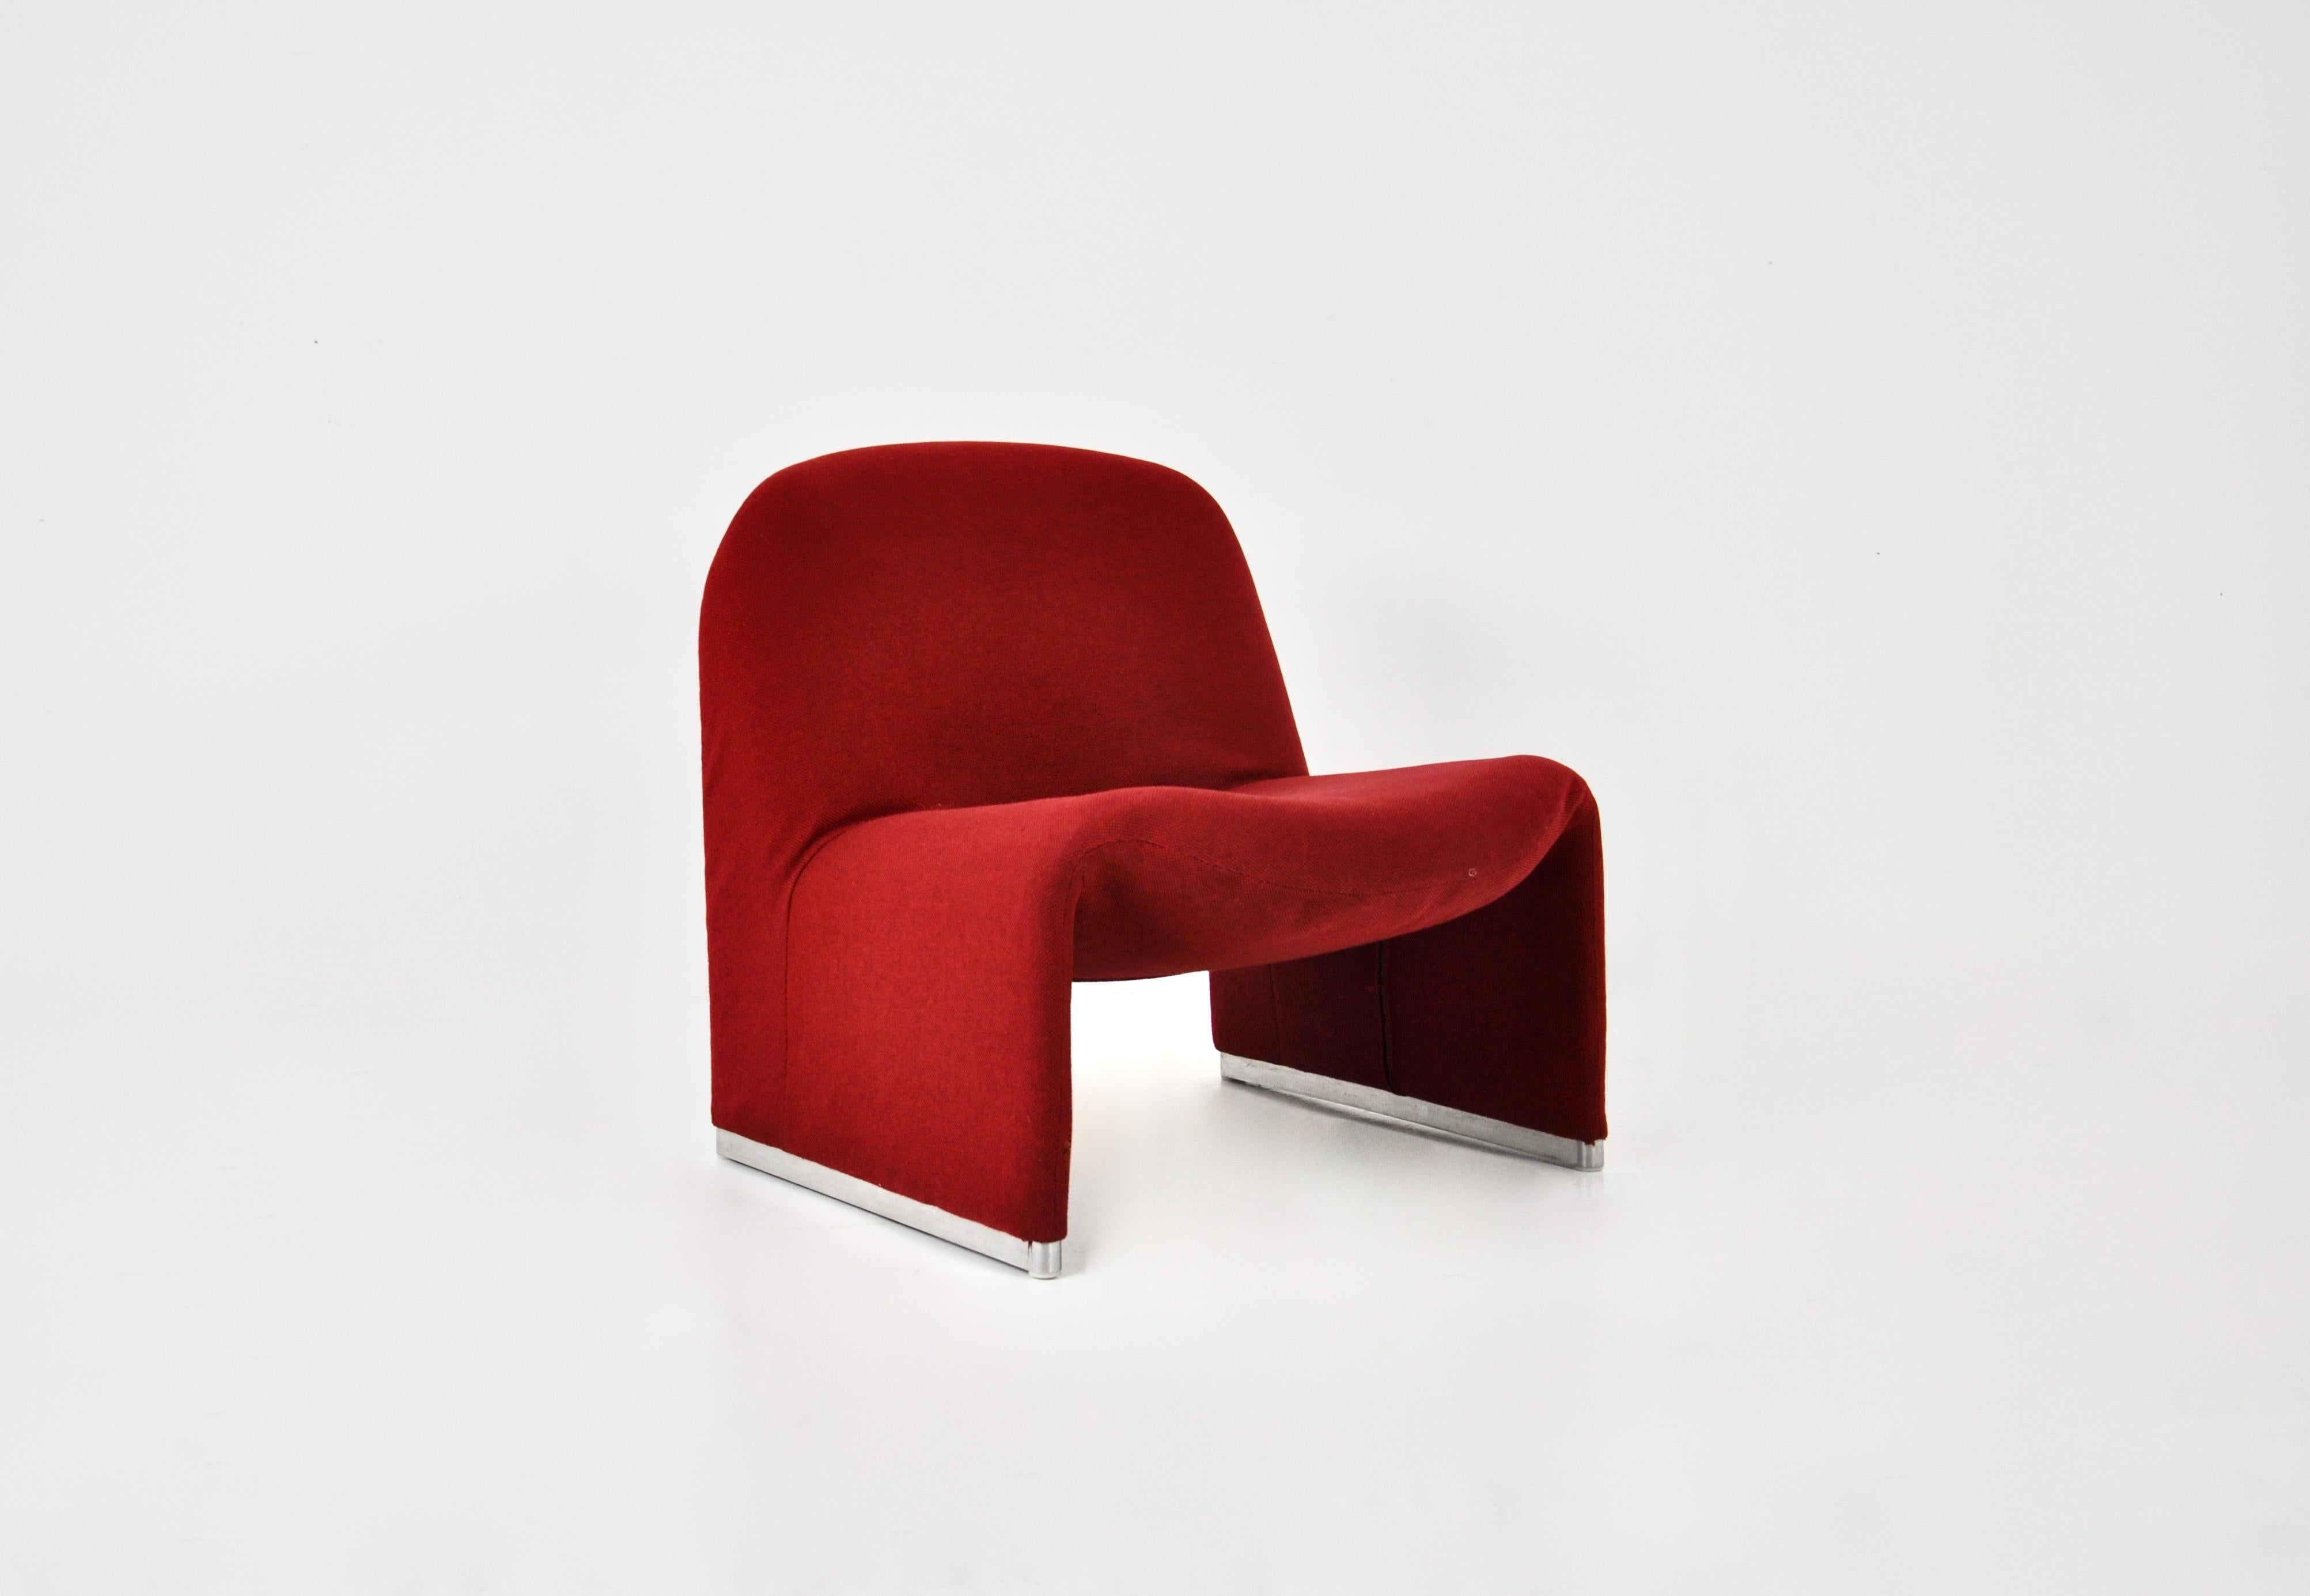 Armchair in red fabric.  Model: Alky by Giancarlo Piretti. Seat height: 40 cm. Wear due to time and age.